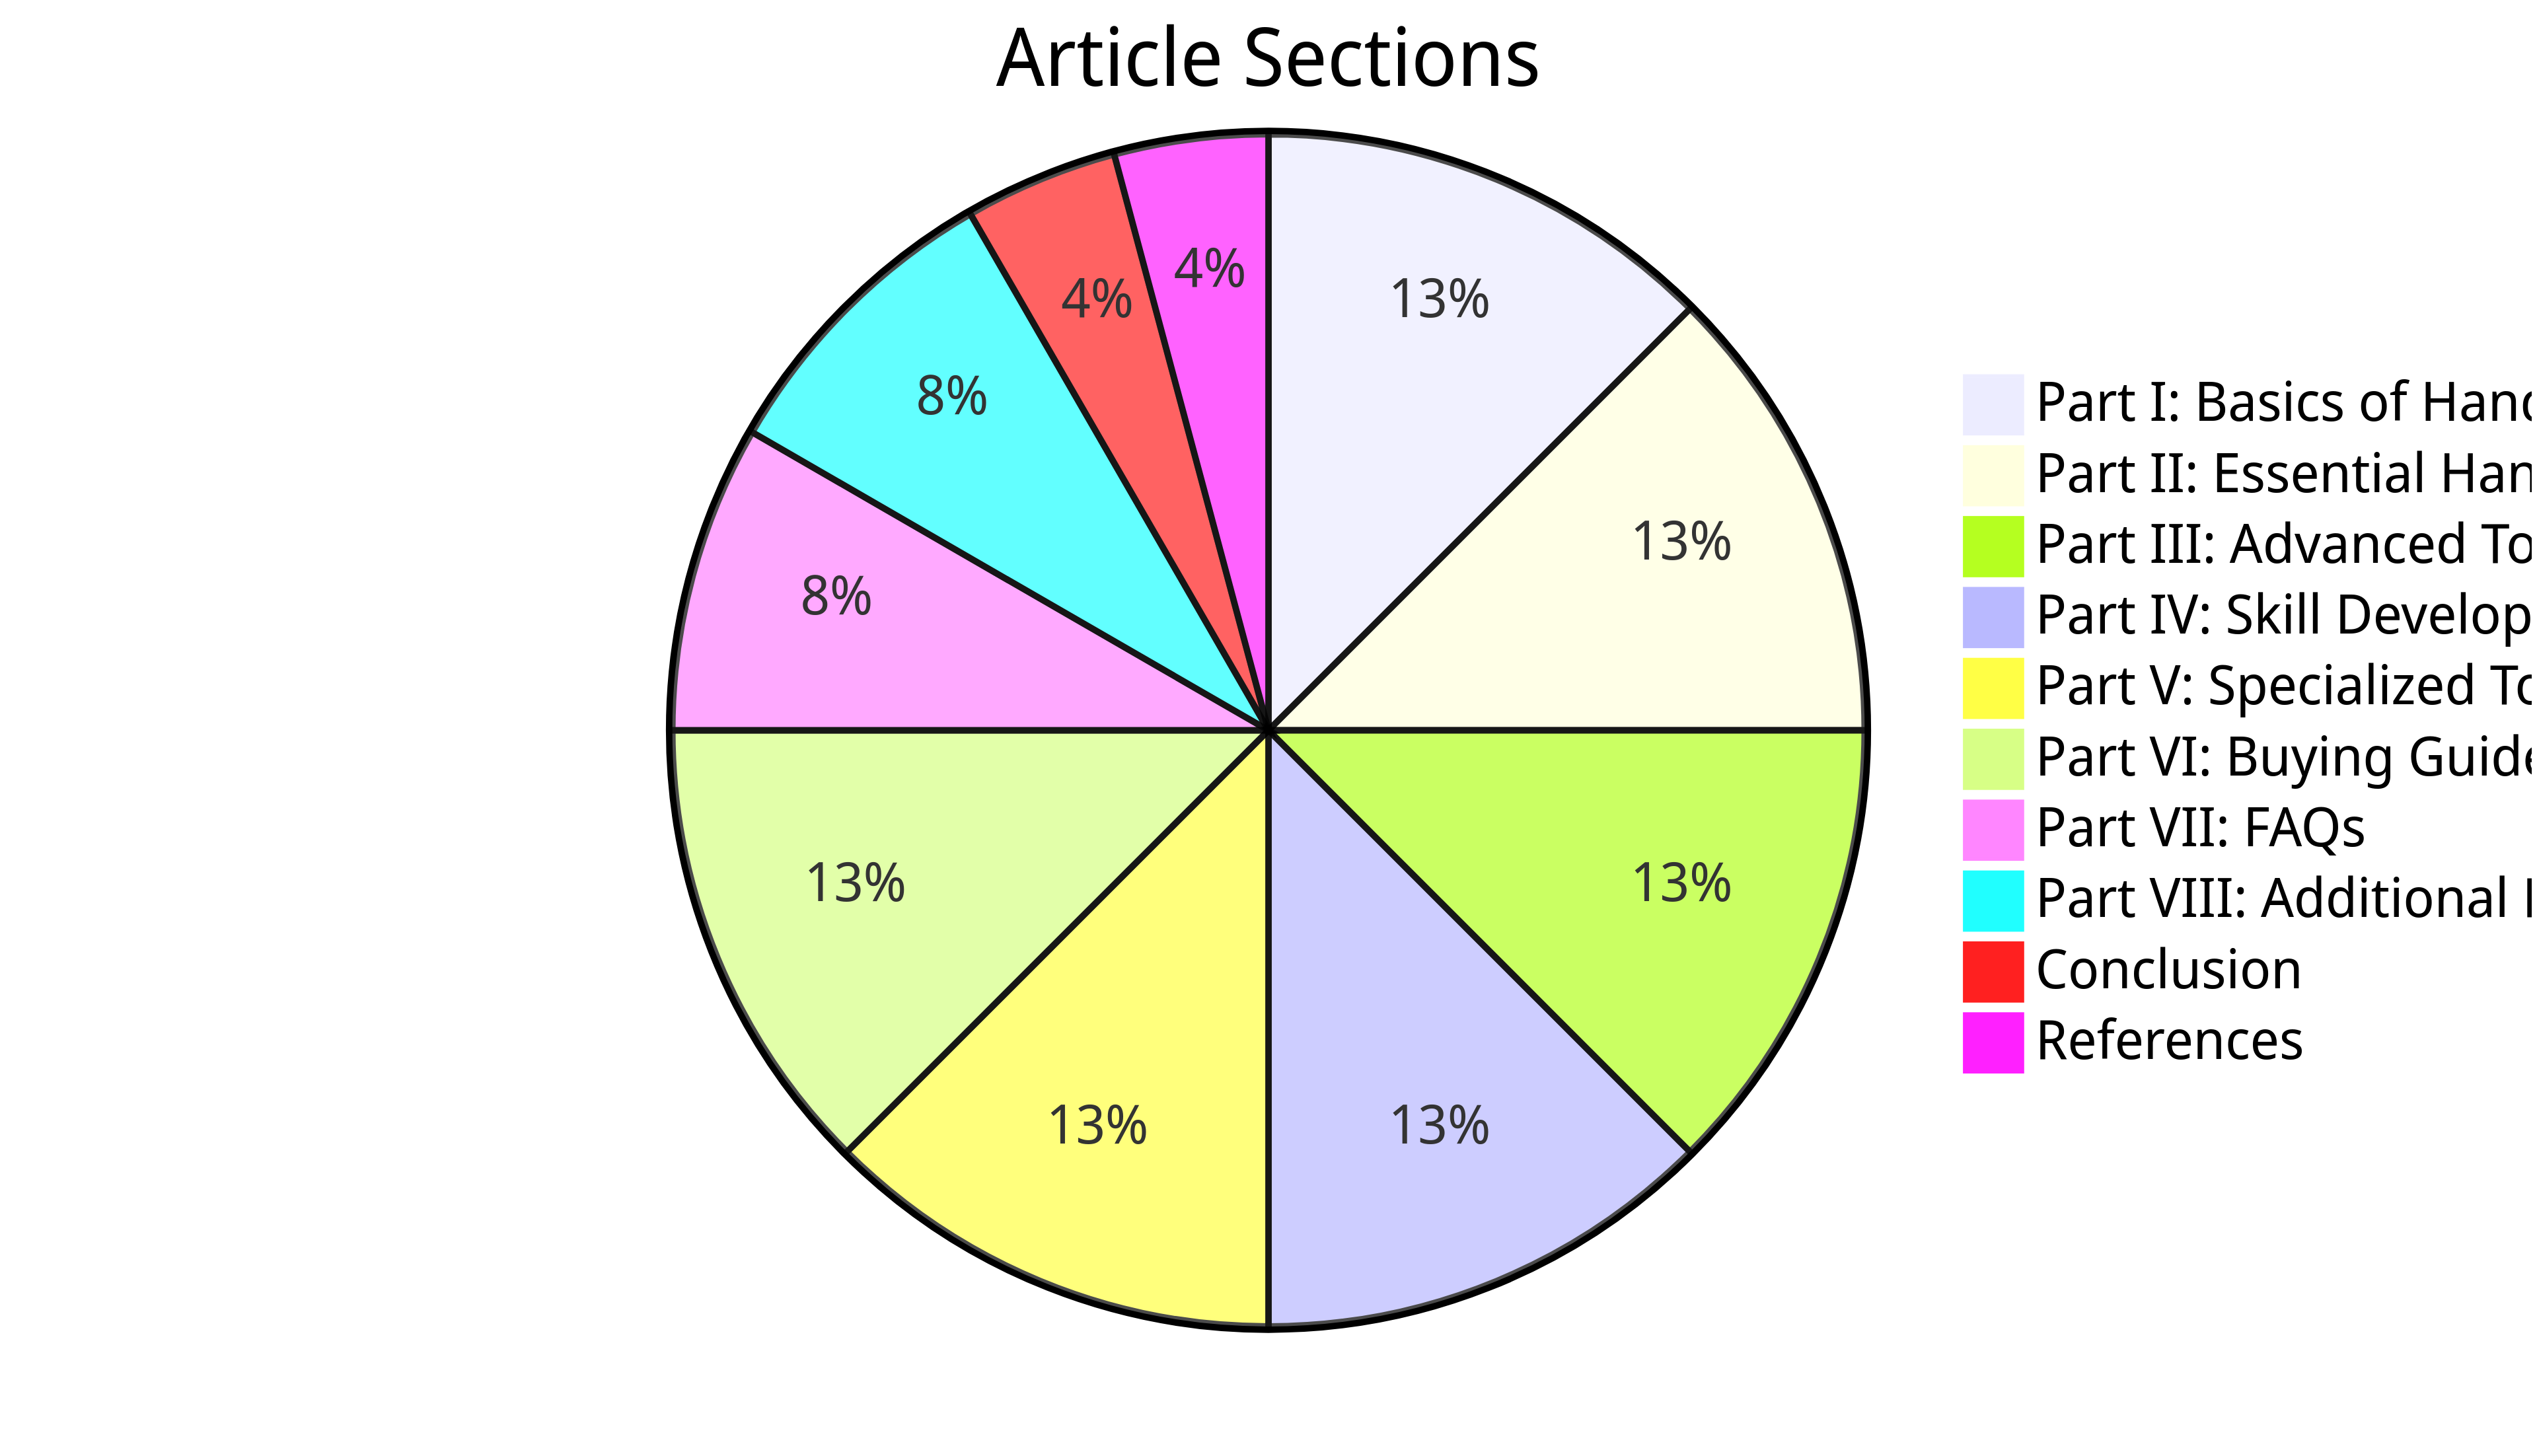 Pie Chart of Article Sections